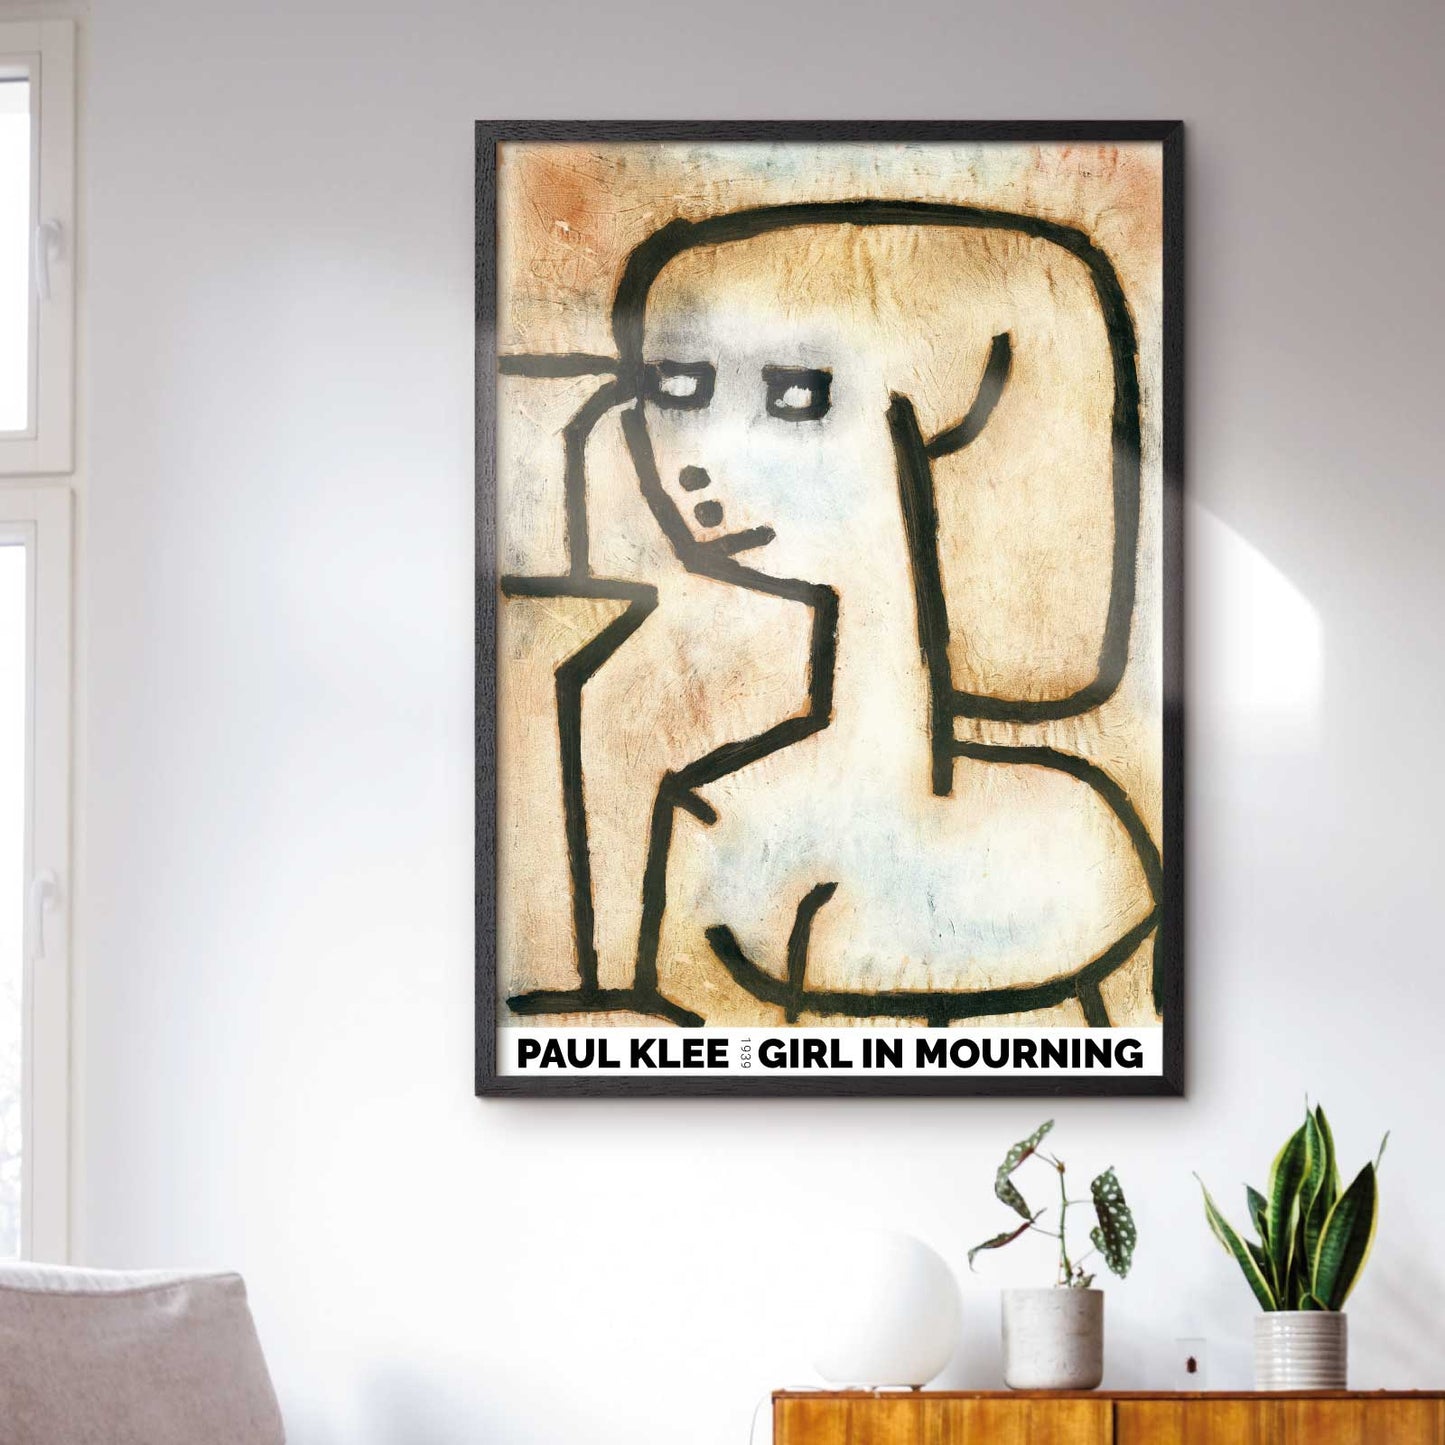 Art poster with "Girl in Mourning" by Paul Klee